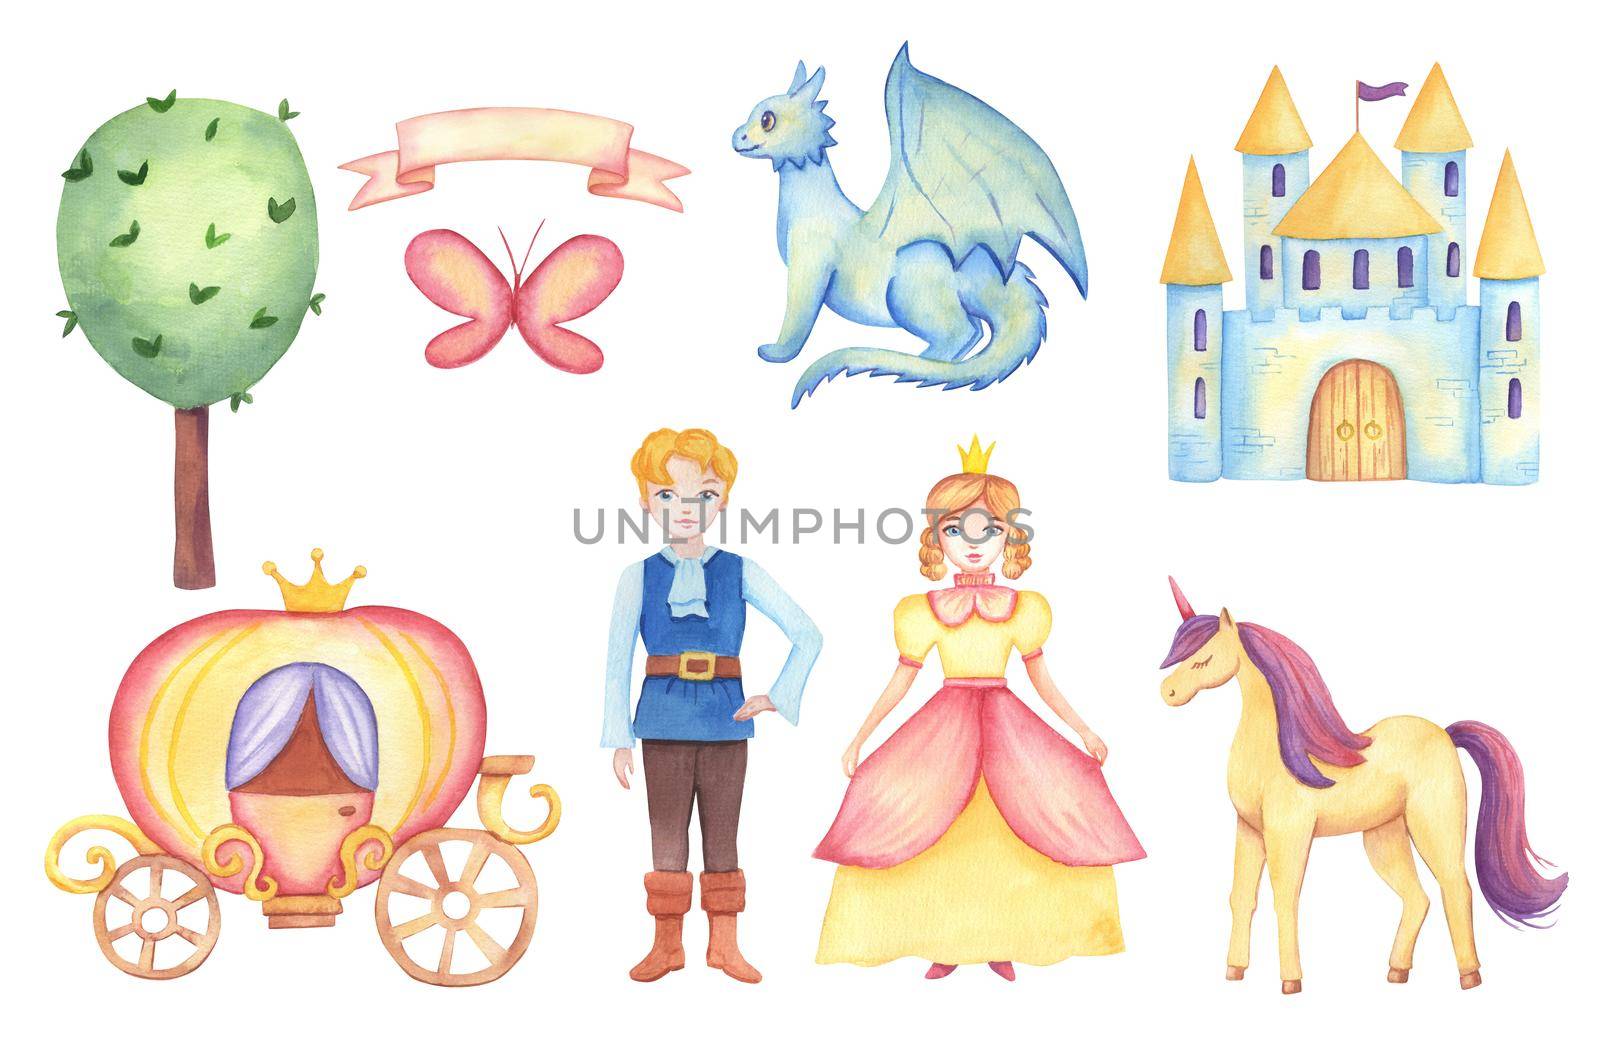 Fantasy Fairy Tale Clipart with characters princess, prince, dragon, castle. Watercolor illustrations isolated on white background